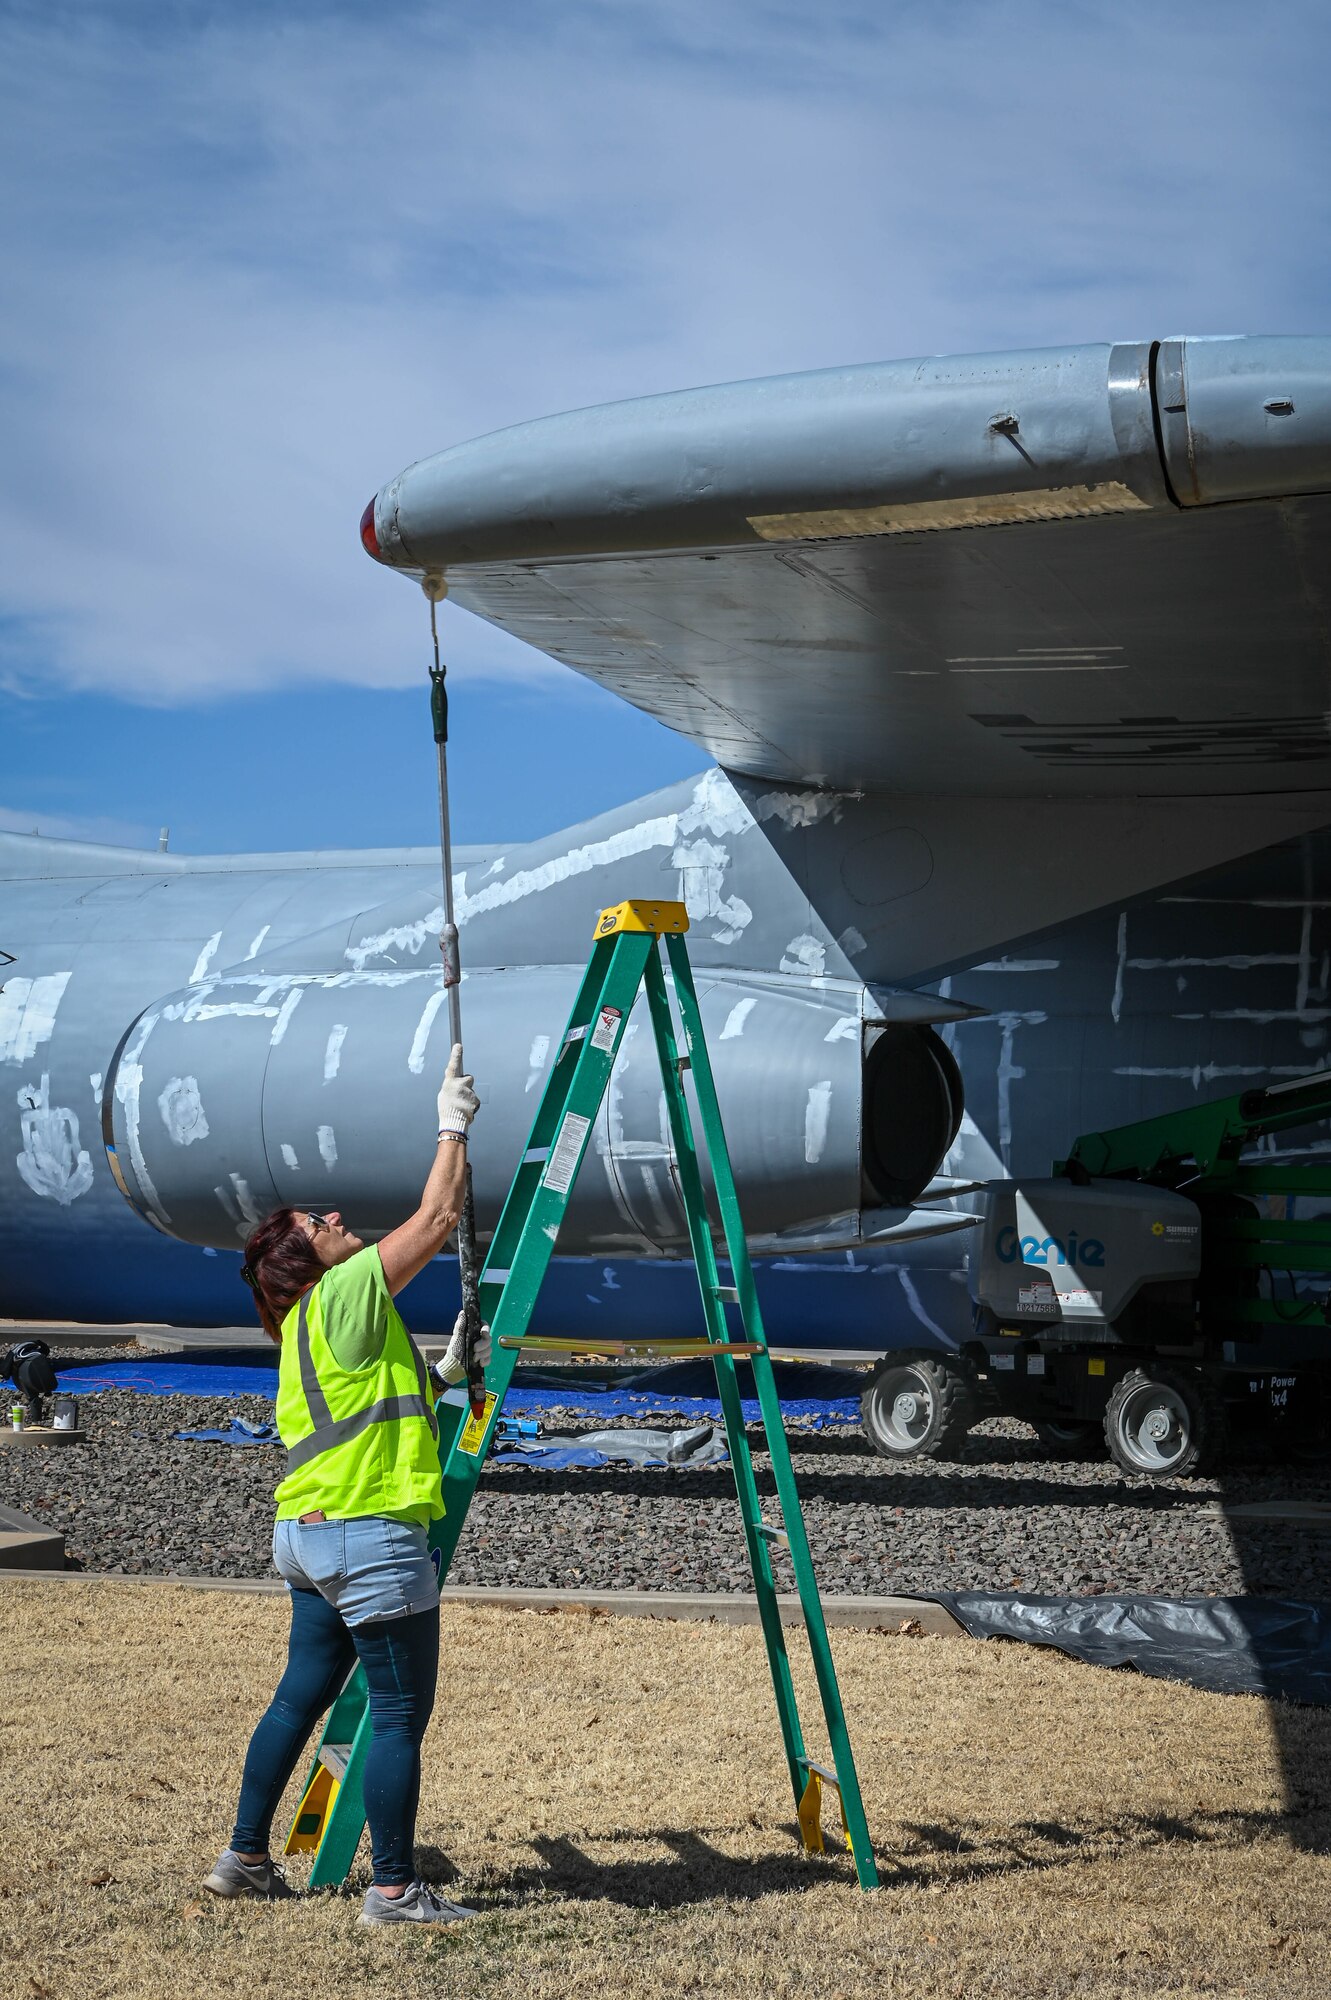 Linda Orefice, a technician, paints a static C-141 Starlifter at Altus Air Force Base, Oklahoma, March 2, 2022. Cleaning the aircraft prevents corrosion, mechanical stress, dust, pollution, excessive heat and humidity, and damage to the aircraft from prolonged exposure to ultraviolet and infrared light. (U.S. Air Force photo by Senior Airman Kayla Christenson)